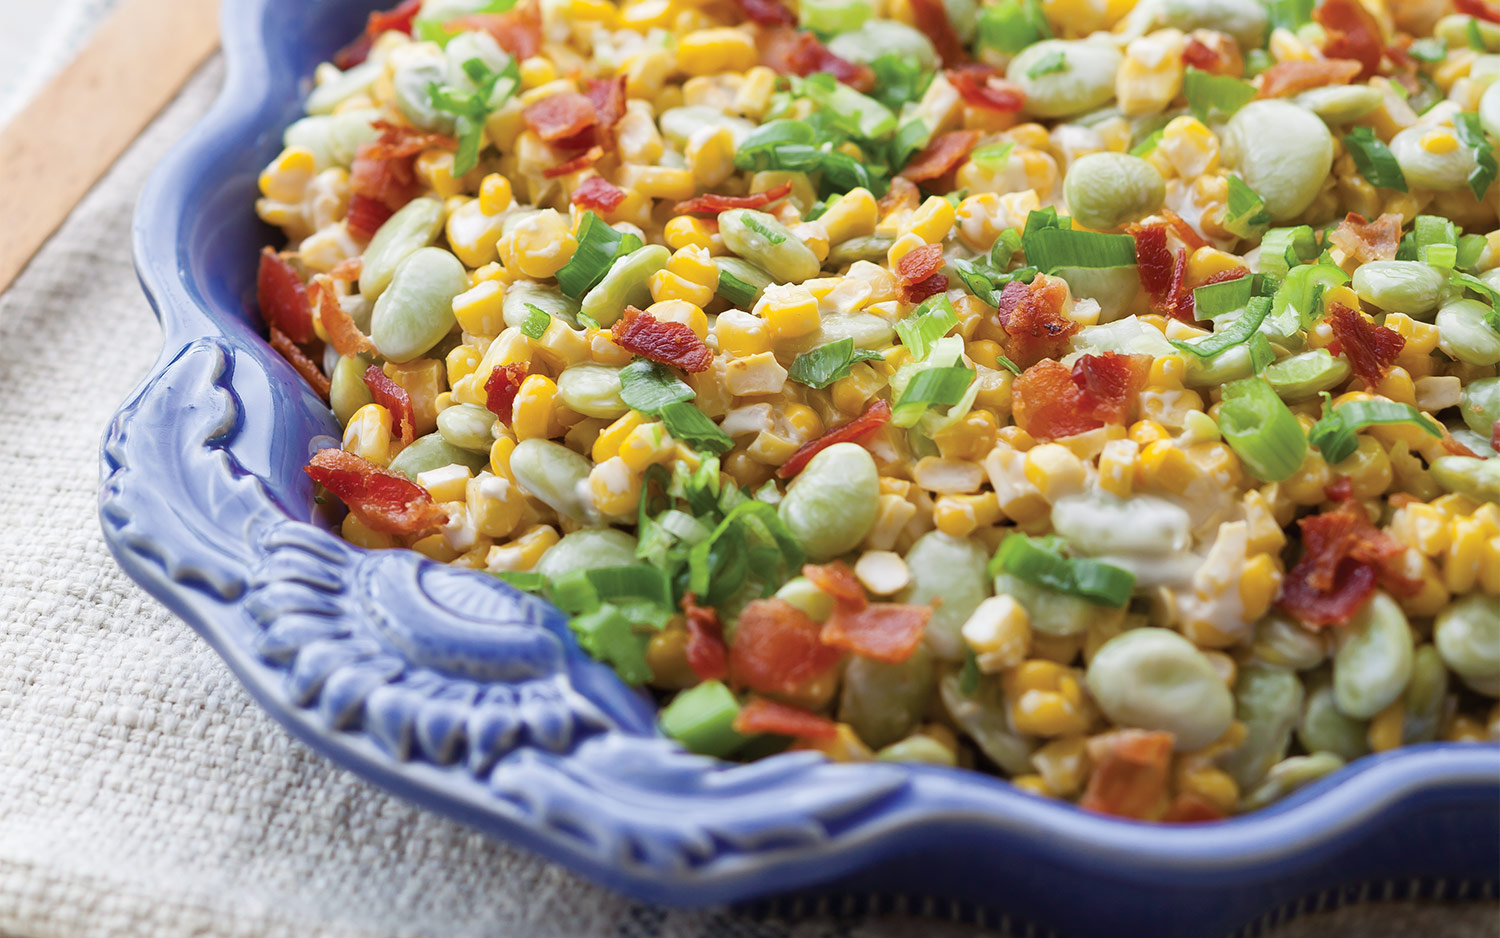 Chilled Succotash Salad in a blue dish